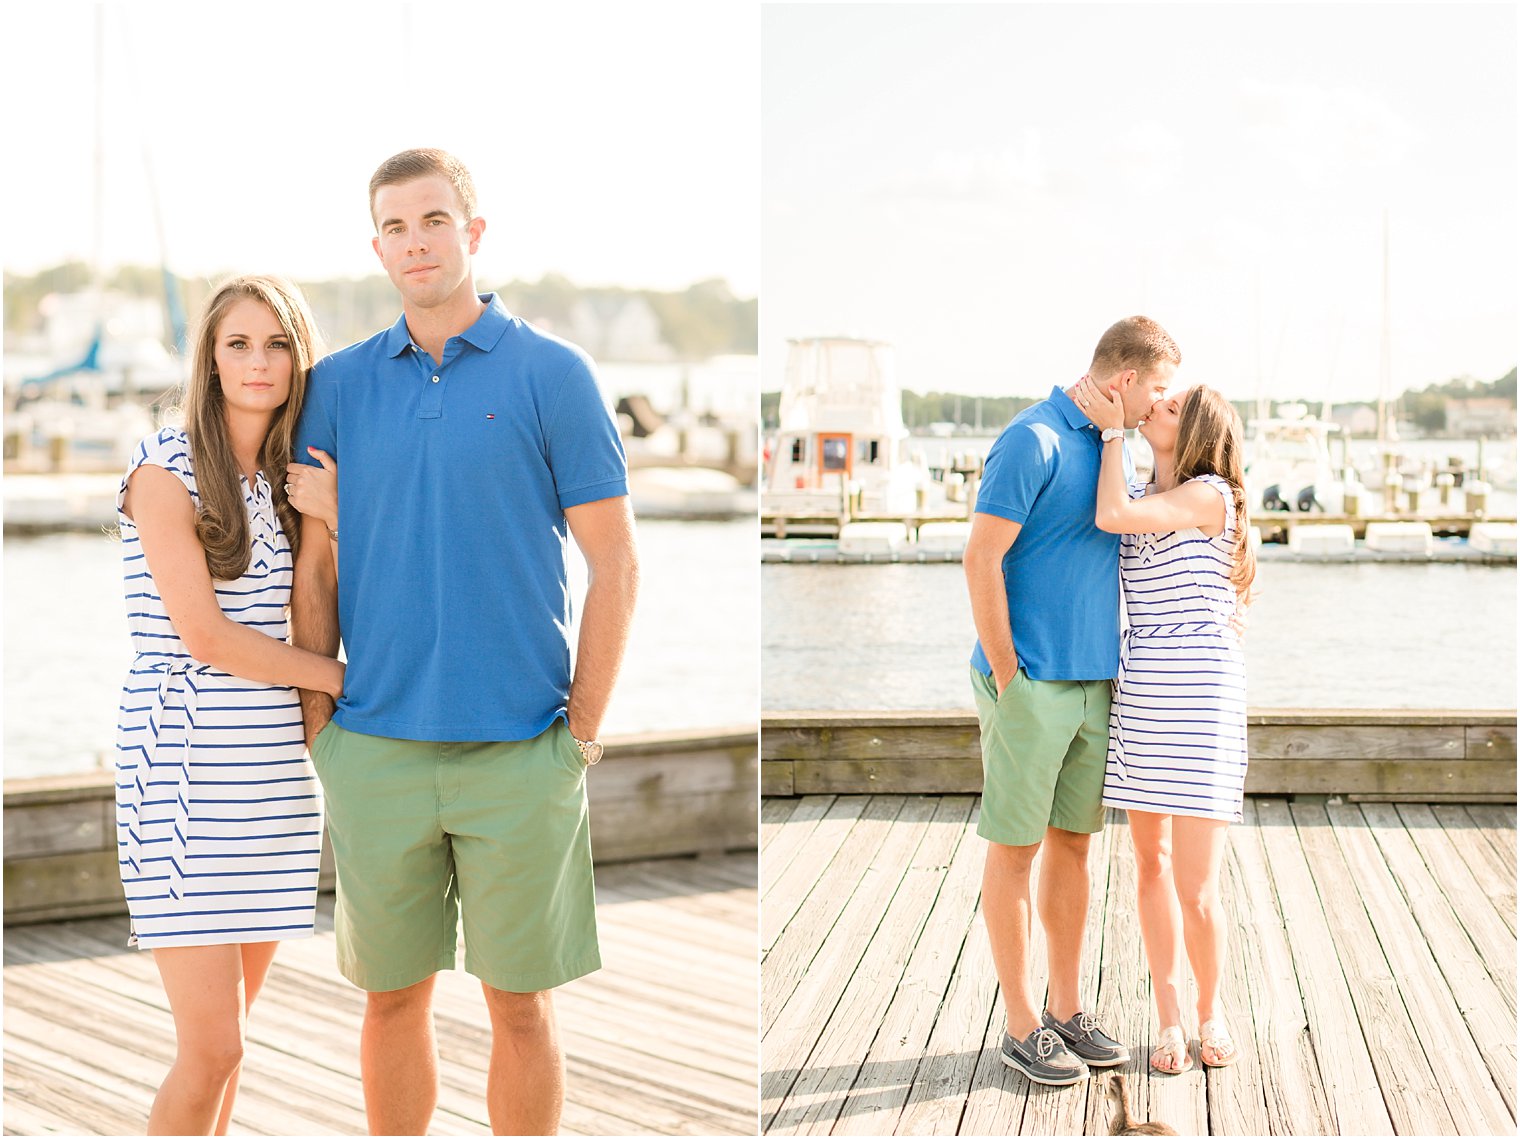 Blue and green engagement photo outfits